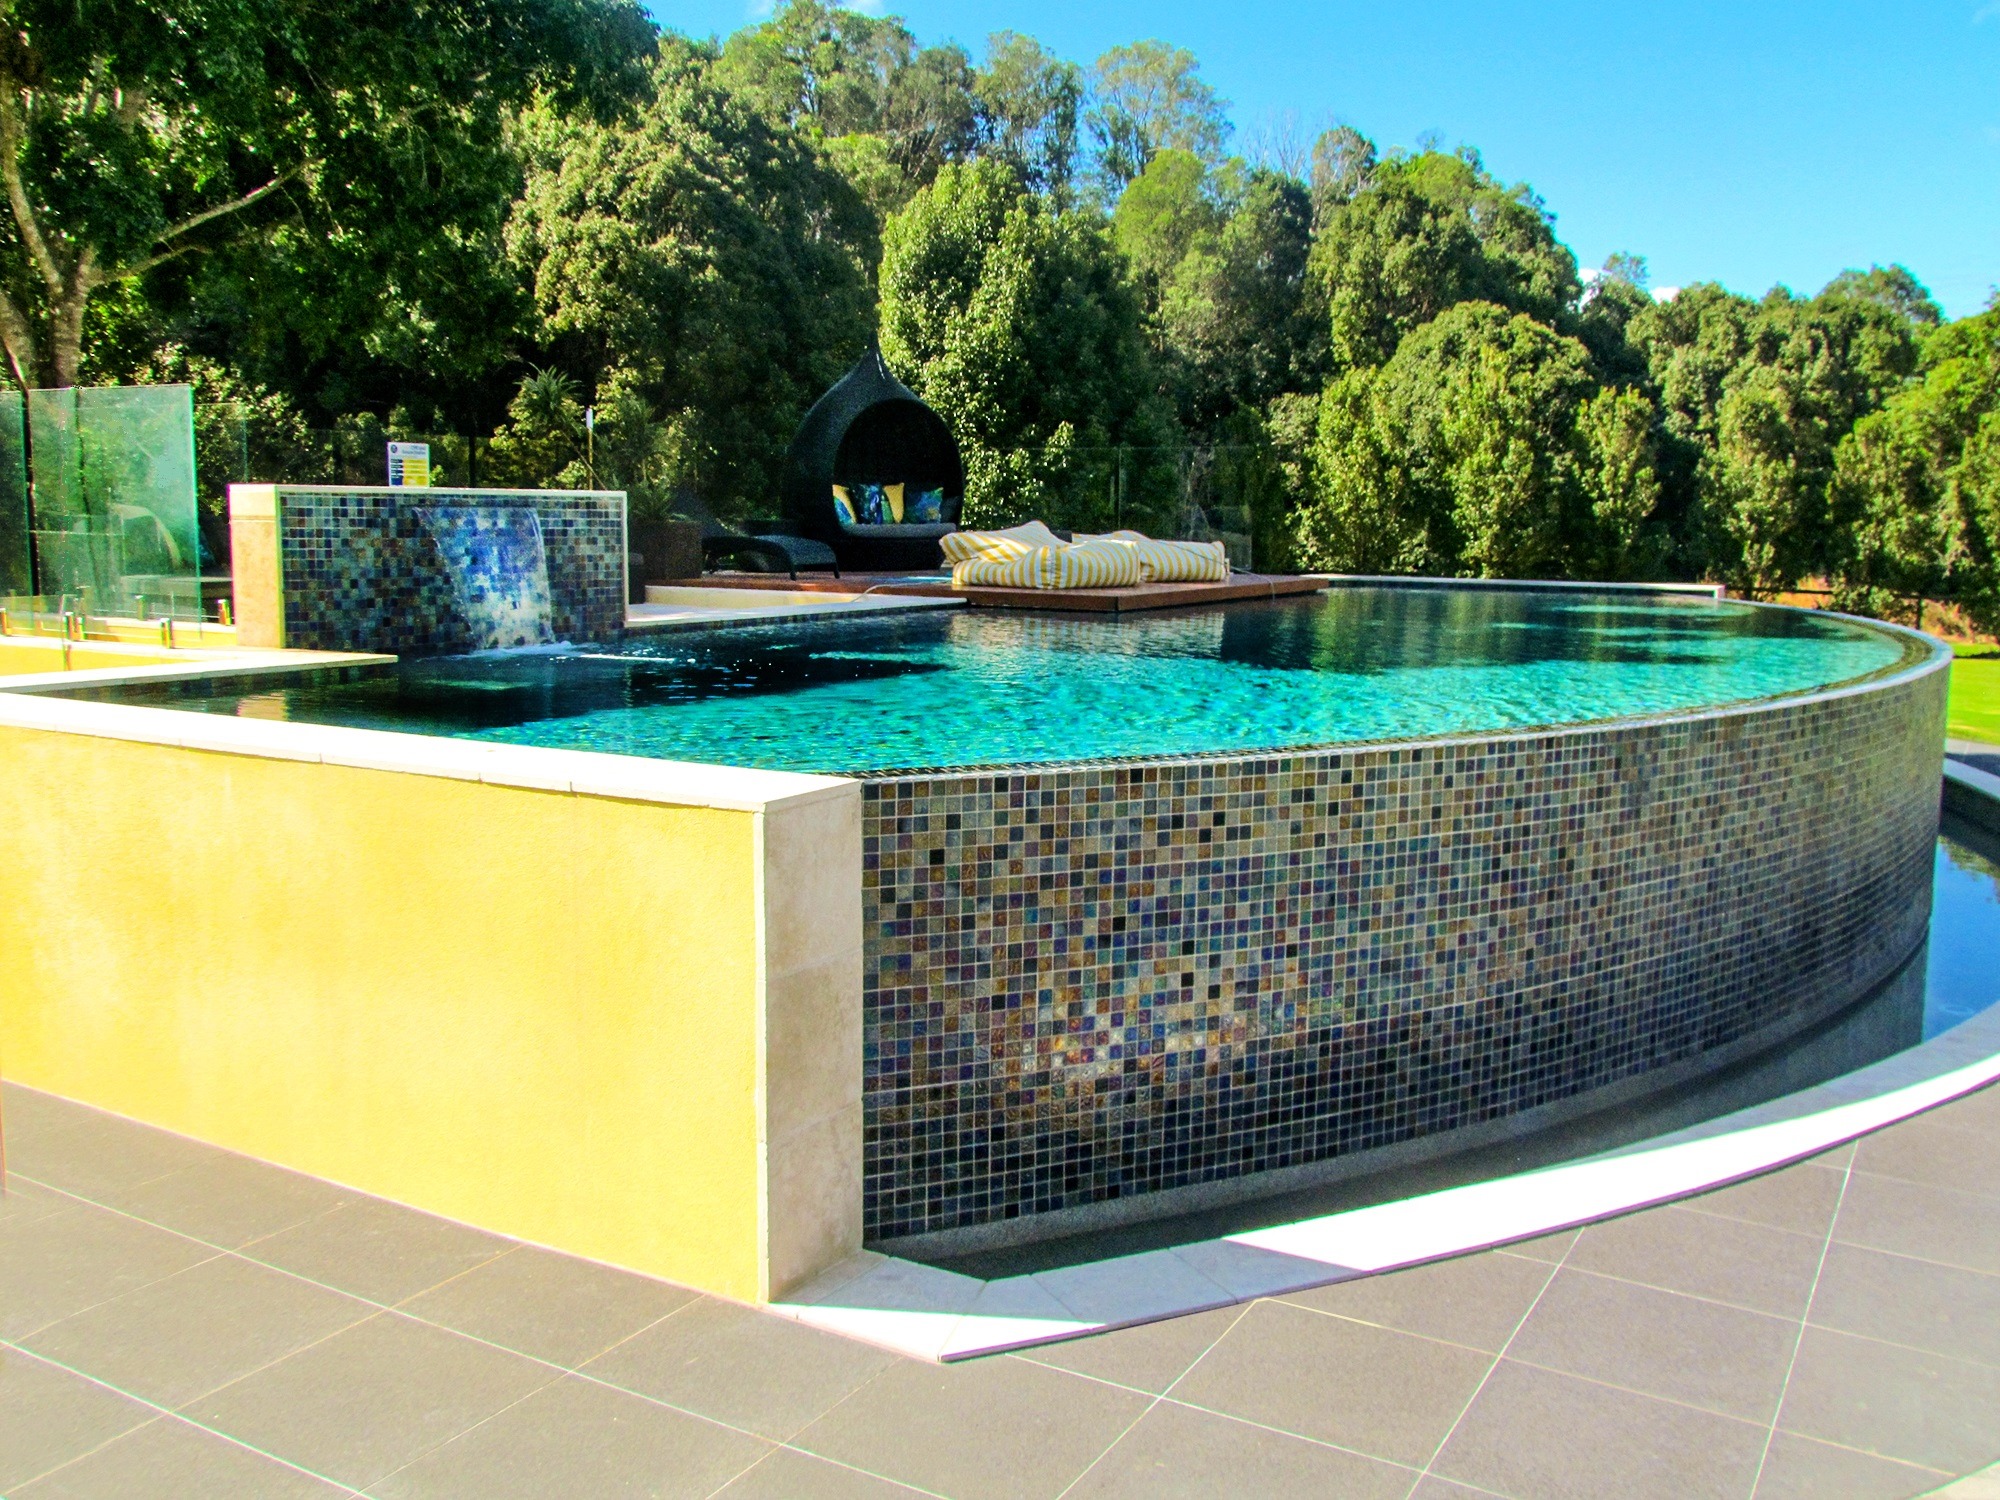 Plunge pool by Burleigh Pools